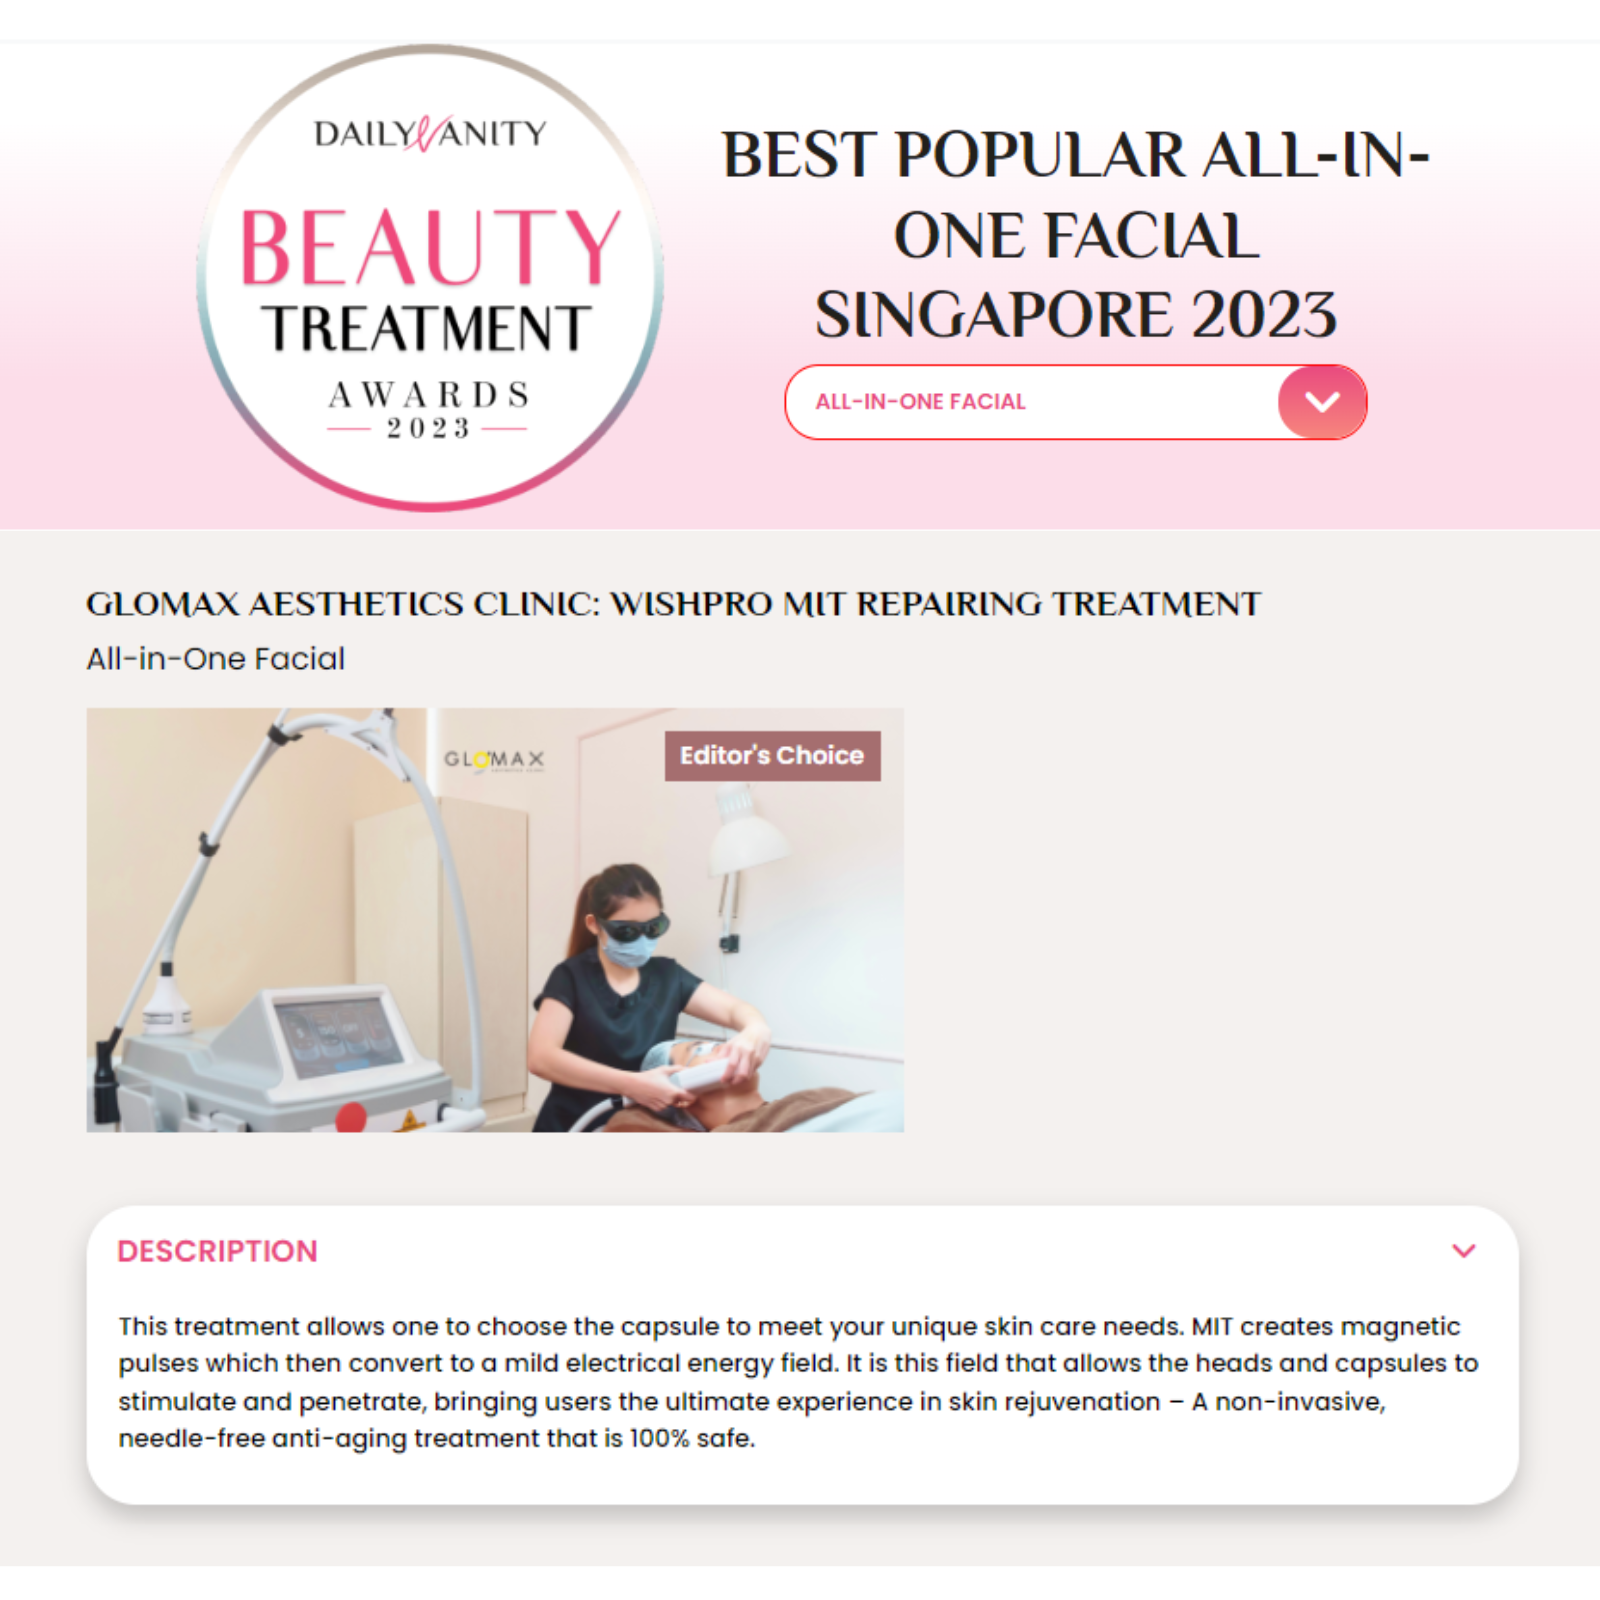 Daily Vanity Beauty Treatment Awards 2023 - Best Popular All-in-one Facial Singapore: Glomax Aesthetics WishPro MIT Repairing Treatment